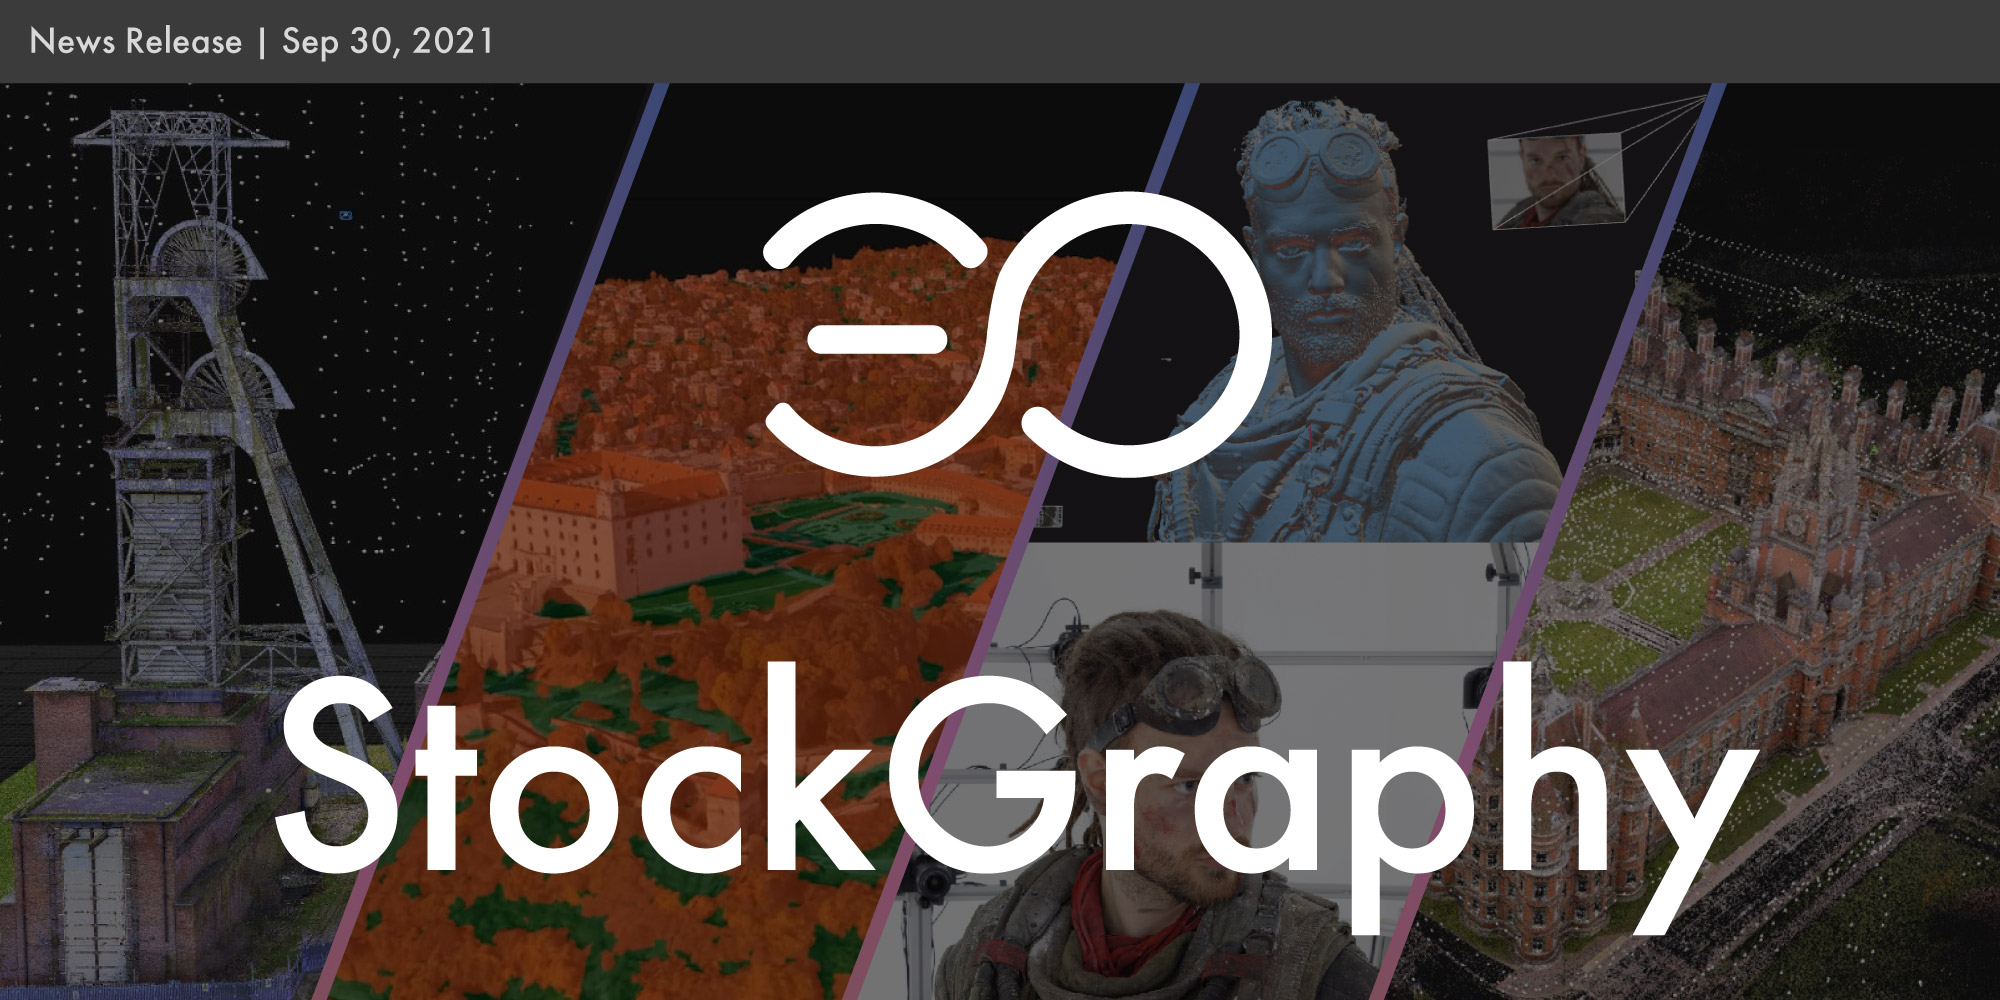 StockGraphy and Japan 3D printer conclude sales partnership agreement of RealityCapture. StockGraphy will start distributing free contents only to customers on the partnership sales network.